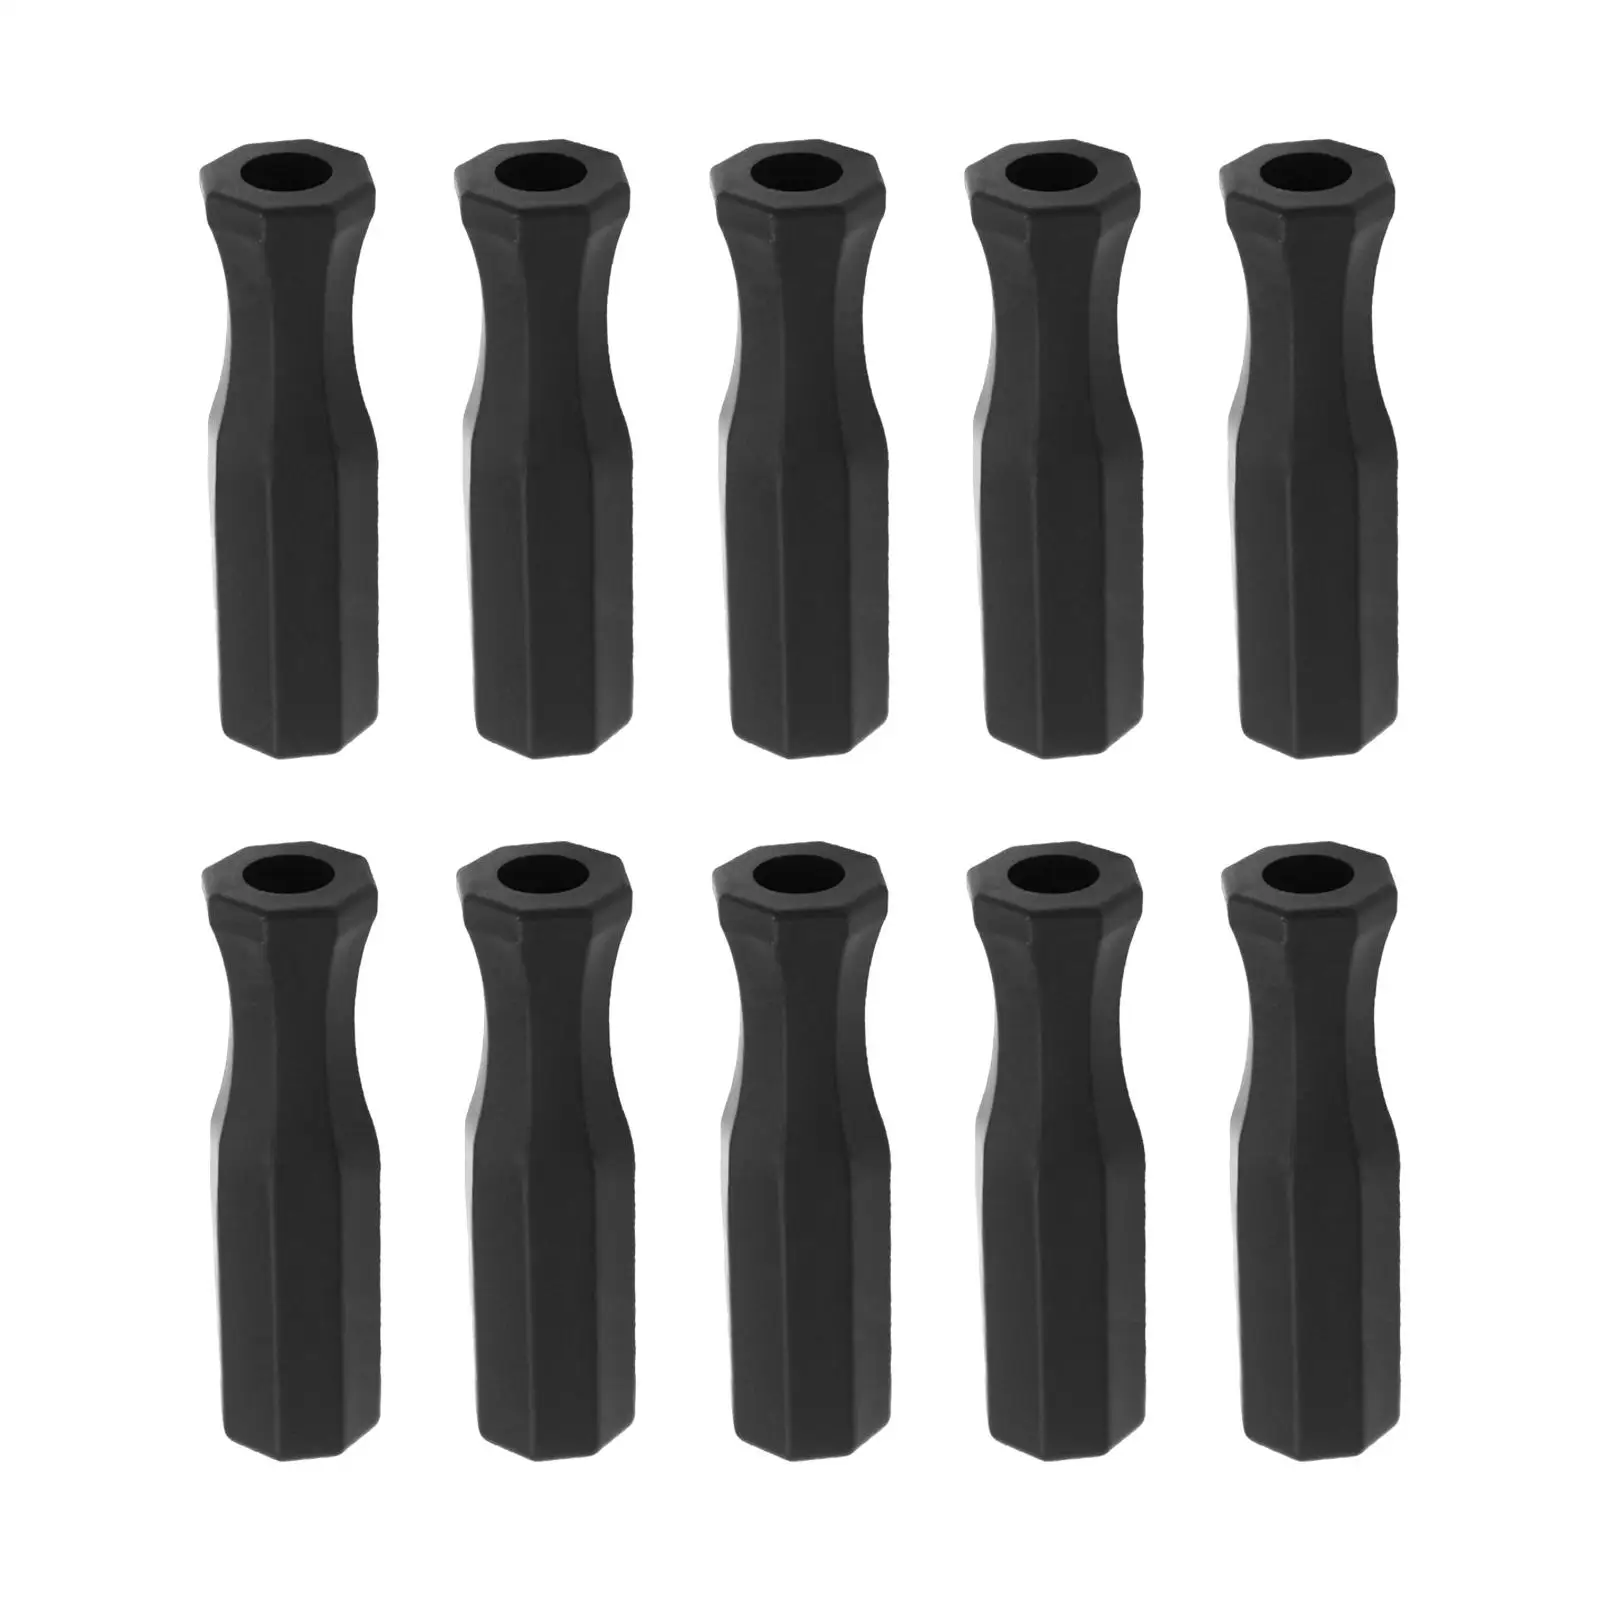 10pcs Table Soccer Parts Replacement Kids Children Football Handle Grip Tabletop